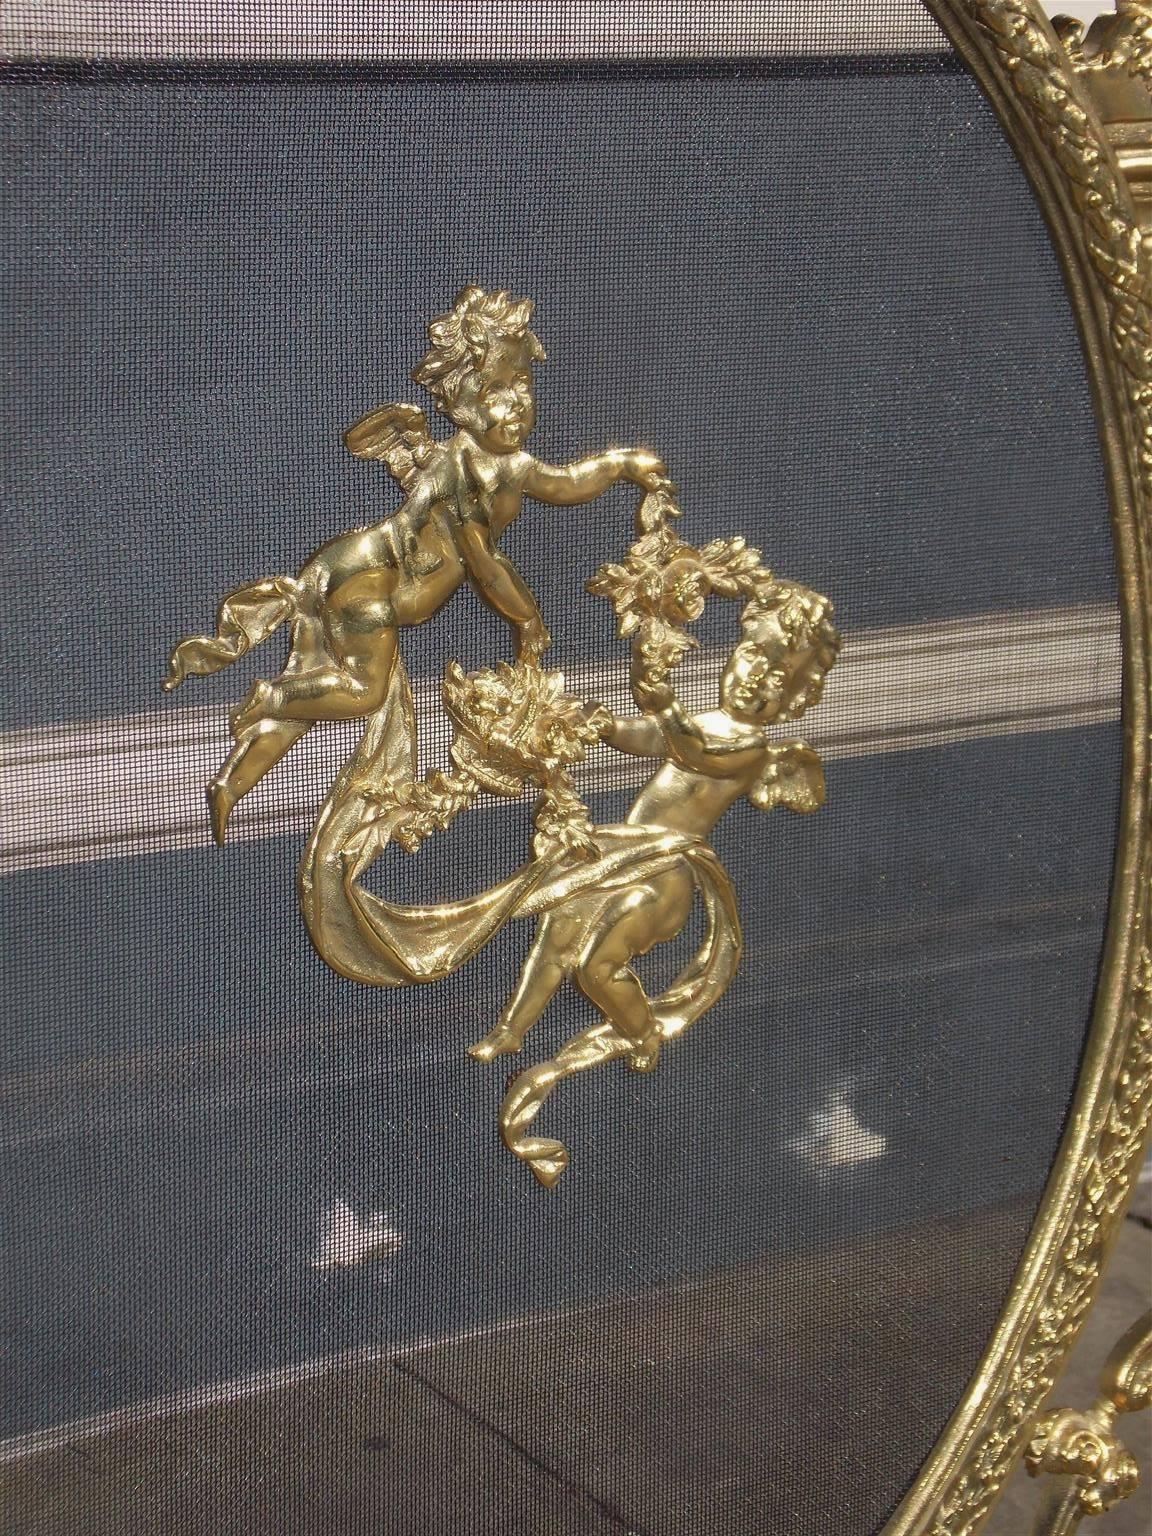 French Gilt Bronze Cherub and Decorative Floral Acanthus Firescreen, Circa 1830 In Excellent Condition For Sale In Hollywood, SC